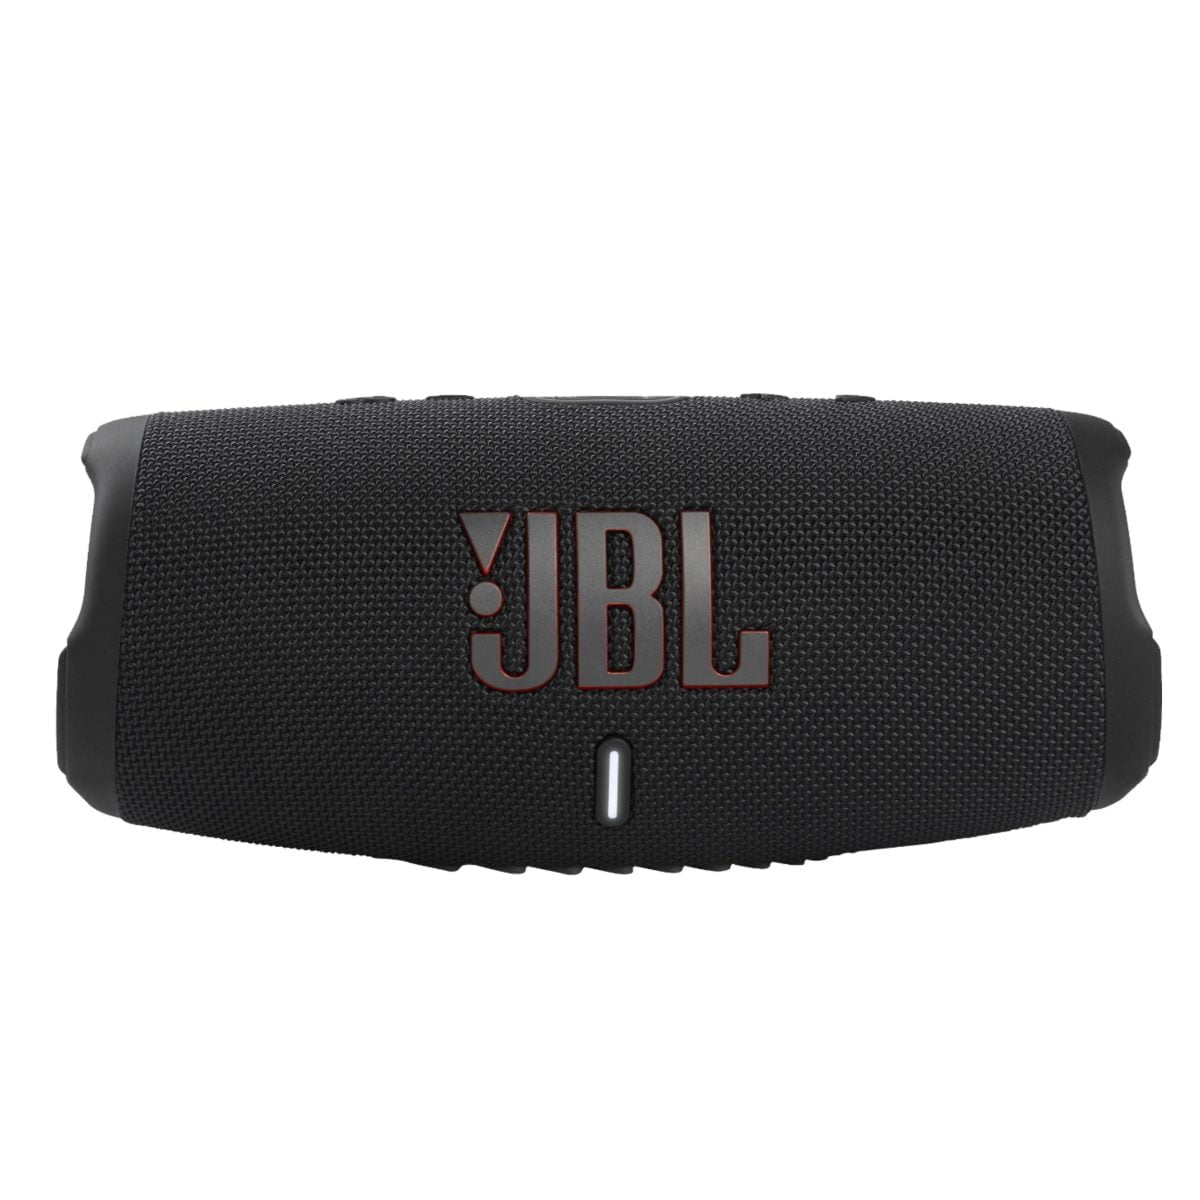 6454256 Sd Jbl &Lt;H1&Gt;Jbl - Charge5 Portable Waterproof Speaker With Powerbank - Black&Lt;/H1&Gt; Https://Www.youtube.com/Watch?V=Fn2W7C7Snr8 Play And Charge Endlessly. Take The Party With You No Matter What The Weather. The Jbl Charge 5 Speaker Delivers Bold Jbl Original Pro Sound, With Its Optimized Long Excursion Driver, Separate Tweeter And Dual Pumping Jbl Bass Radiators. Up To 20 Hours Of Playtime And A Handy Powerbank To Keep Your Devices Charged To Keep The Party Going All Night. Rain? Spilled Drinks? Beach Sand? The Ip67 Waterproof And Dustproof Charge 5 Survives Whatever Comes Its Way. Thanks To Partyboost, You Can Connect Multiple Jbl Partyboost-Enabled Speakers For A Sound Big Enough For Any Crowd. With All-New Colors Inspired By The Latest Street Fashion Trends, It Looks As Great As It Sounds. Jbl Speaker Jbl Charge 5 Portable Waterproof Speaker With Powerbank - Black